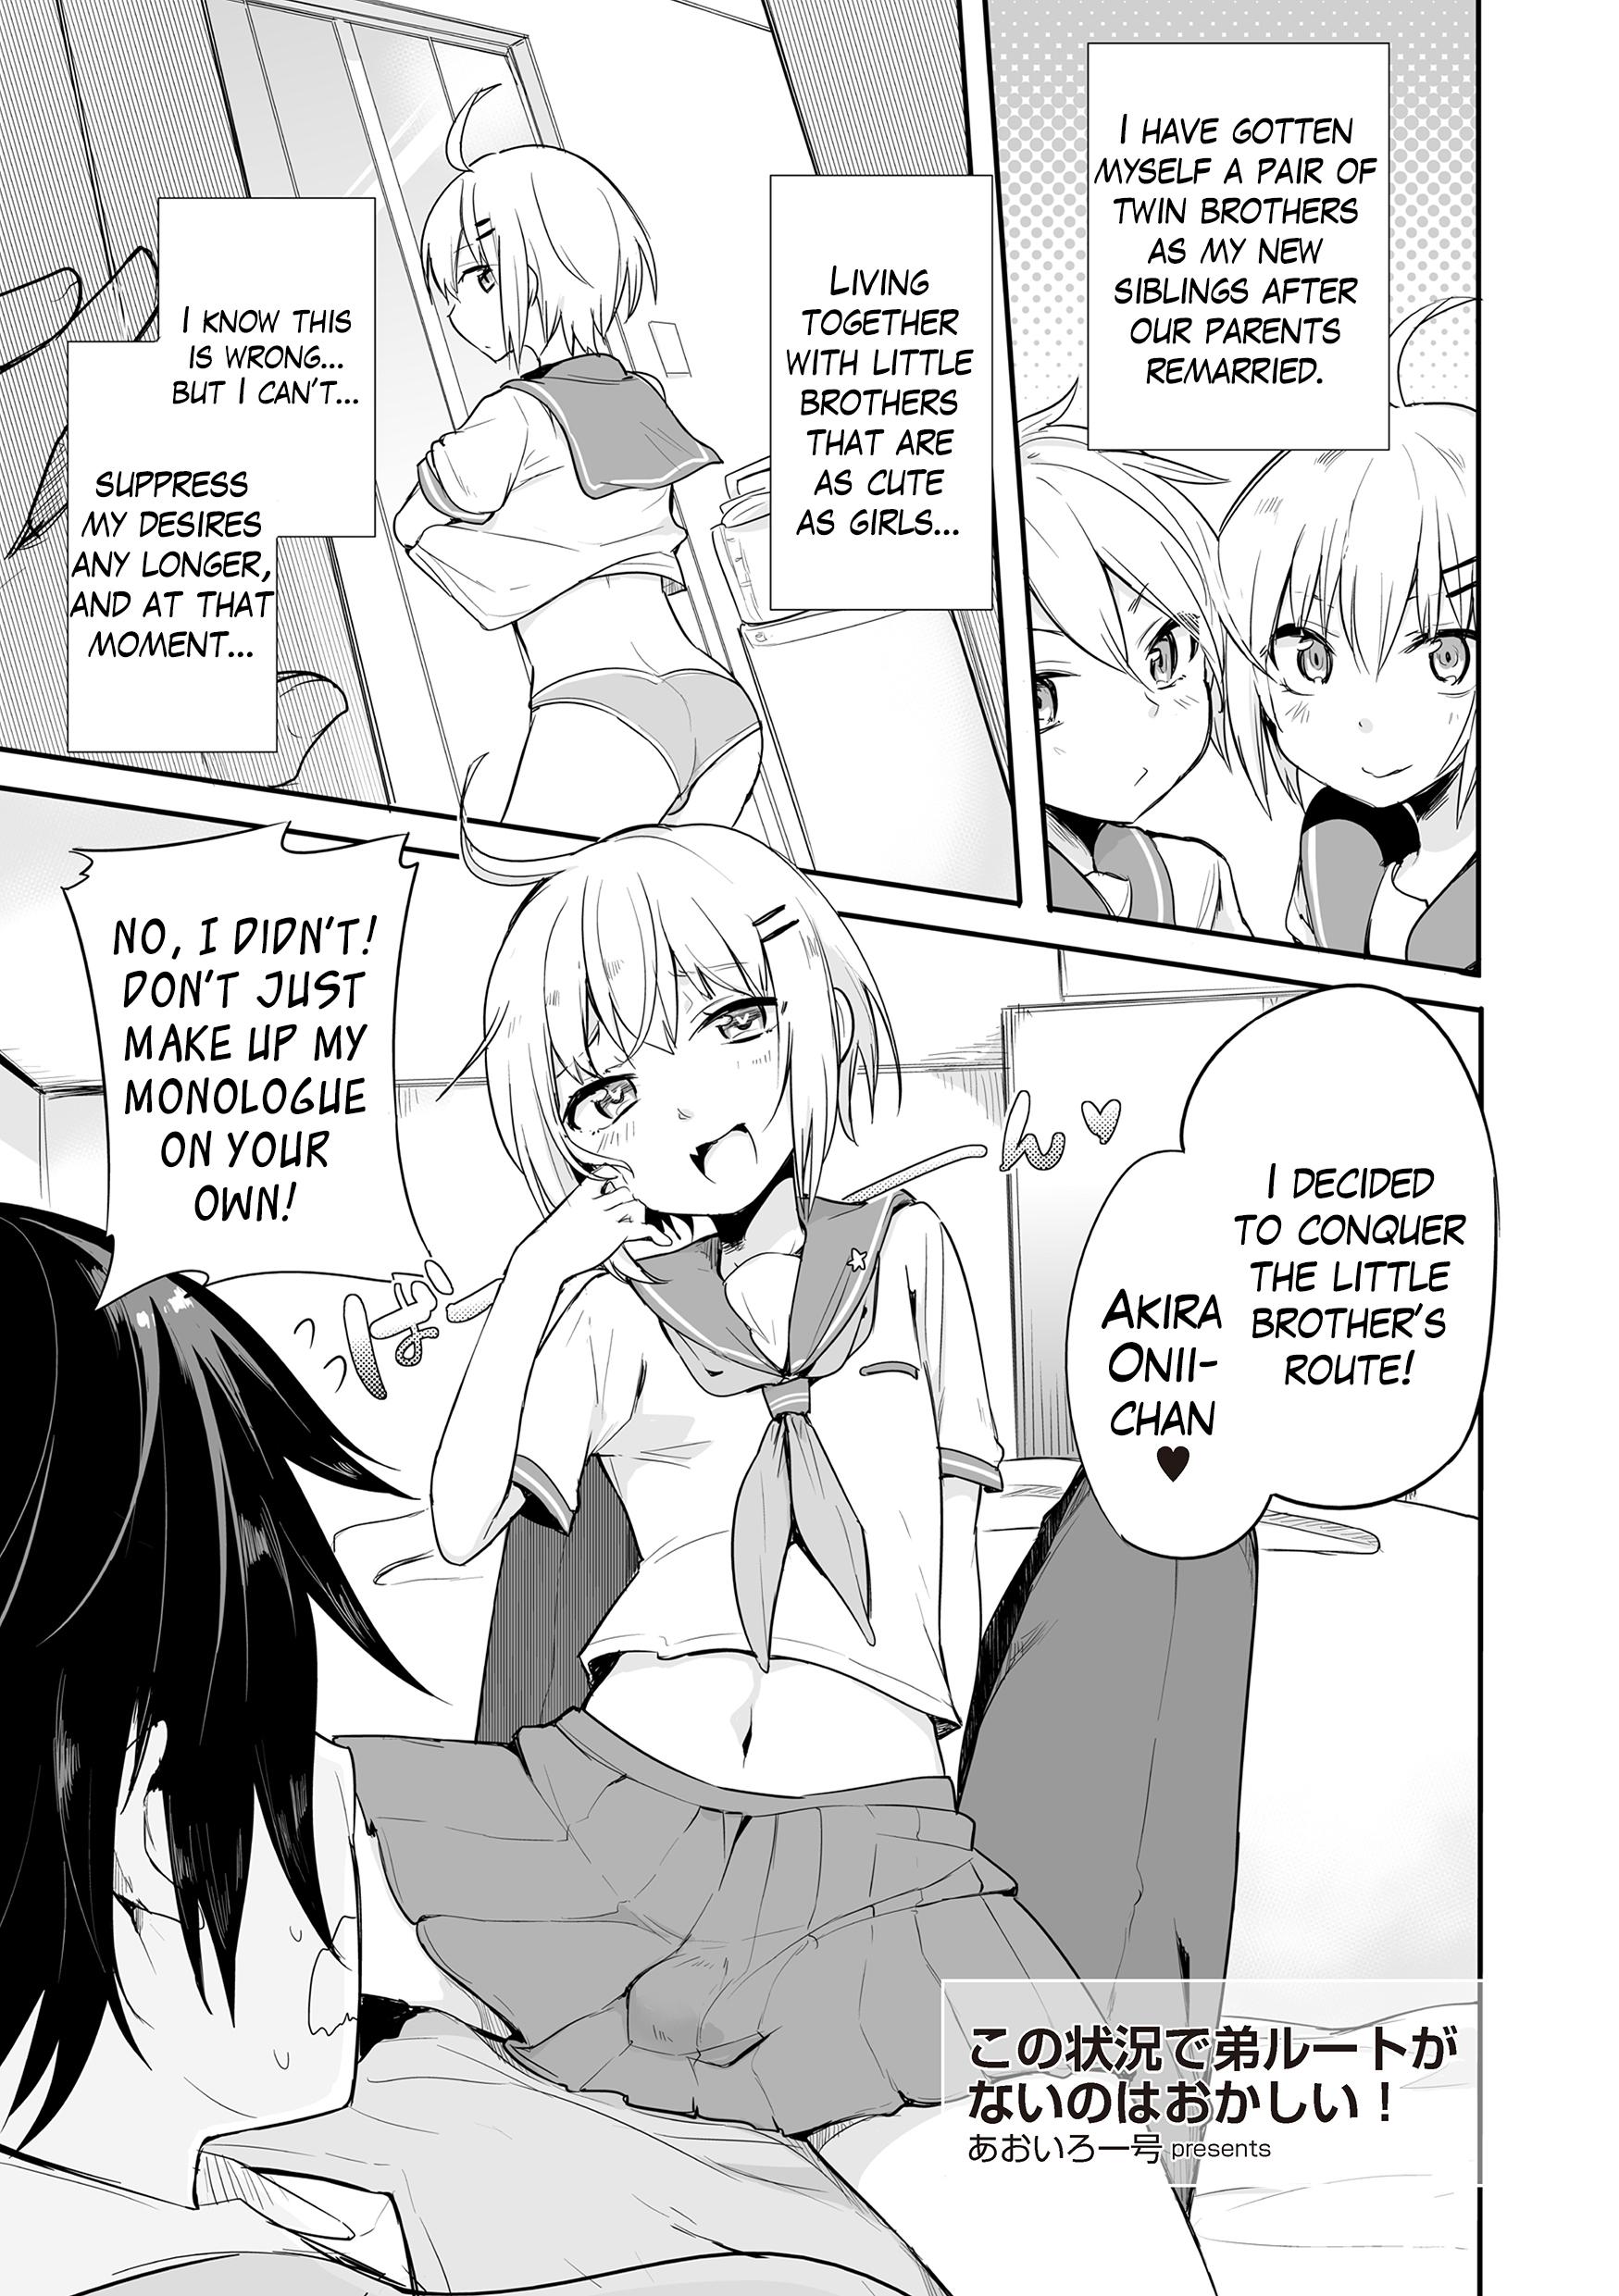 Pov Sex Kono Joukyou de Otouto Route ga nai no wa Okashii! | This Situation is too Weird for it not to be a Little Brother’s Route! Olderwoman - Page 2